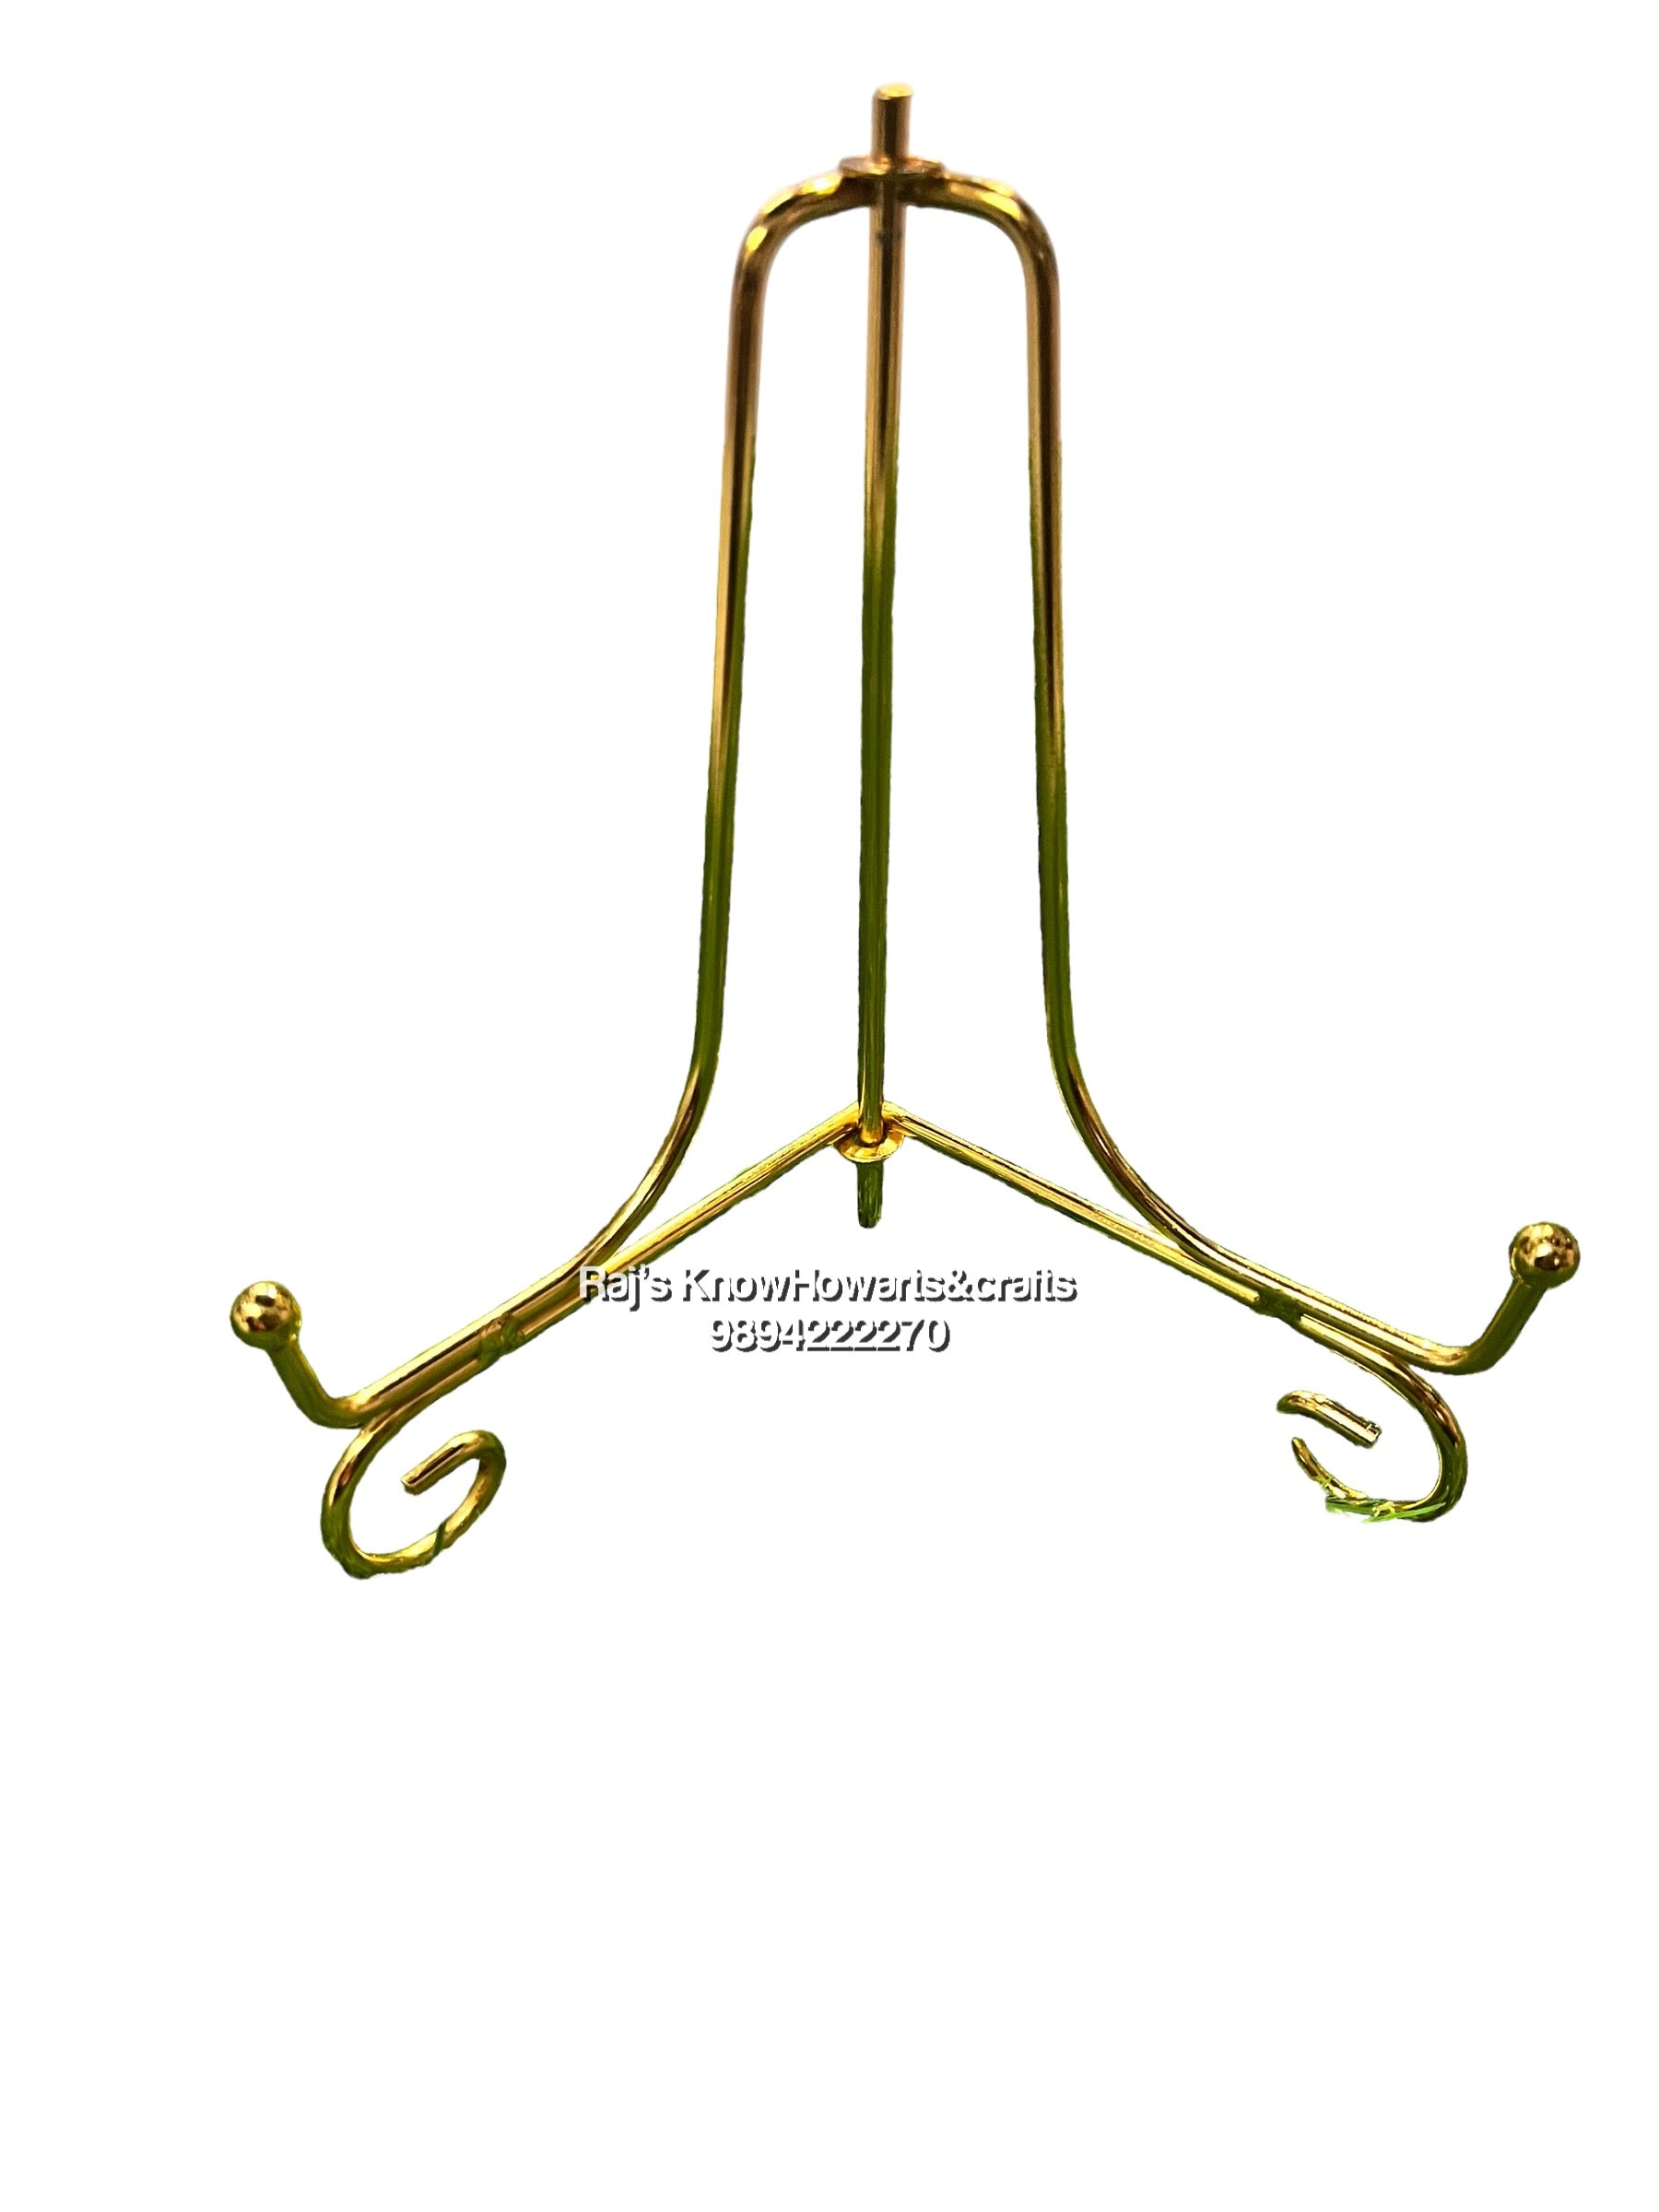 Gold metal easel stand - large size